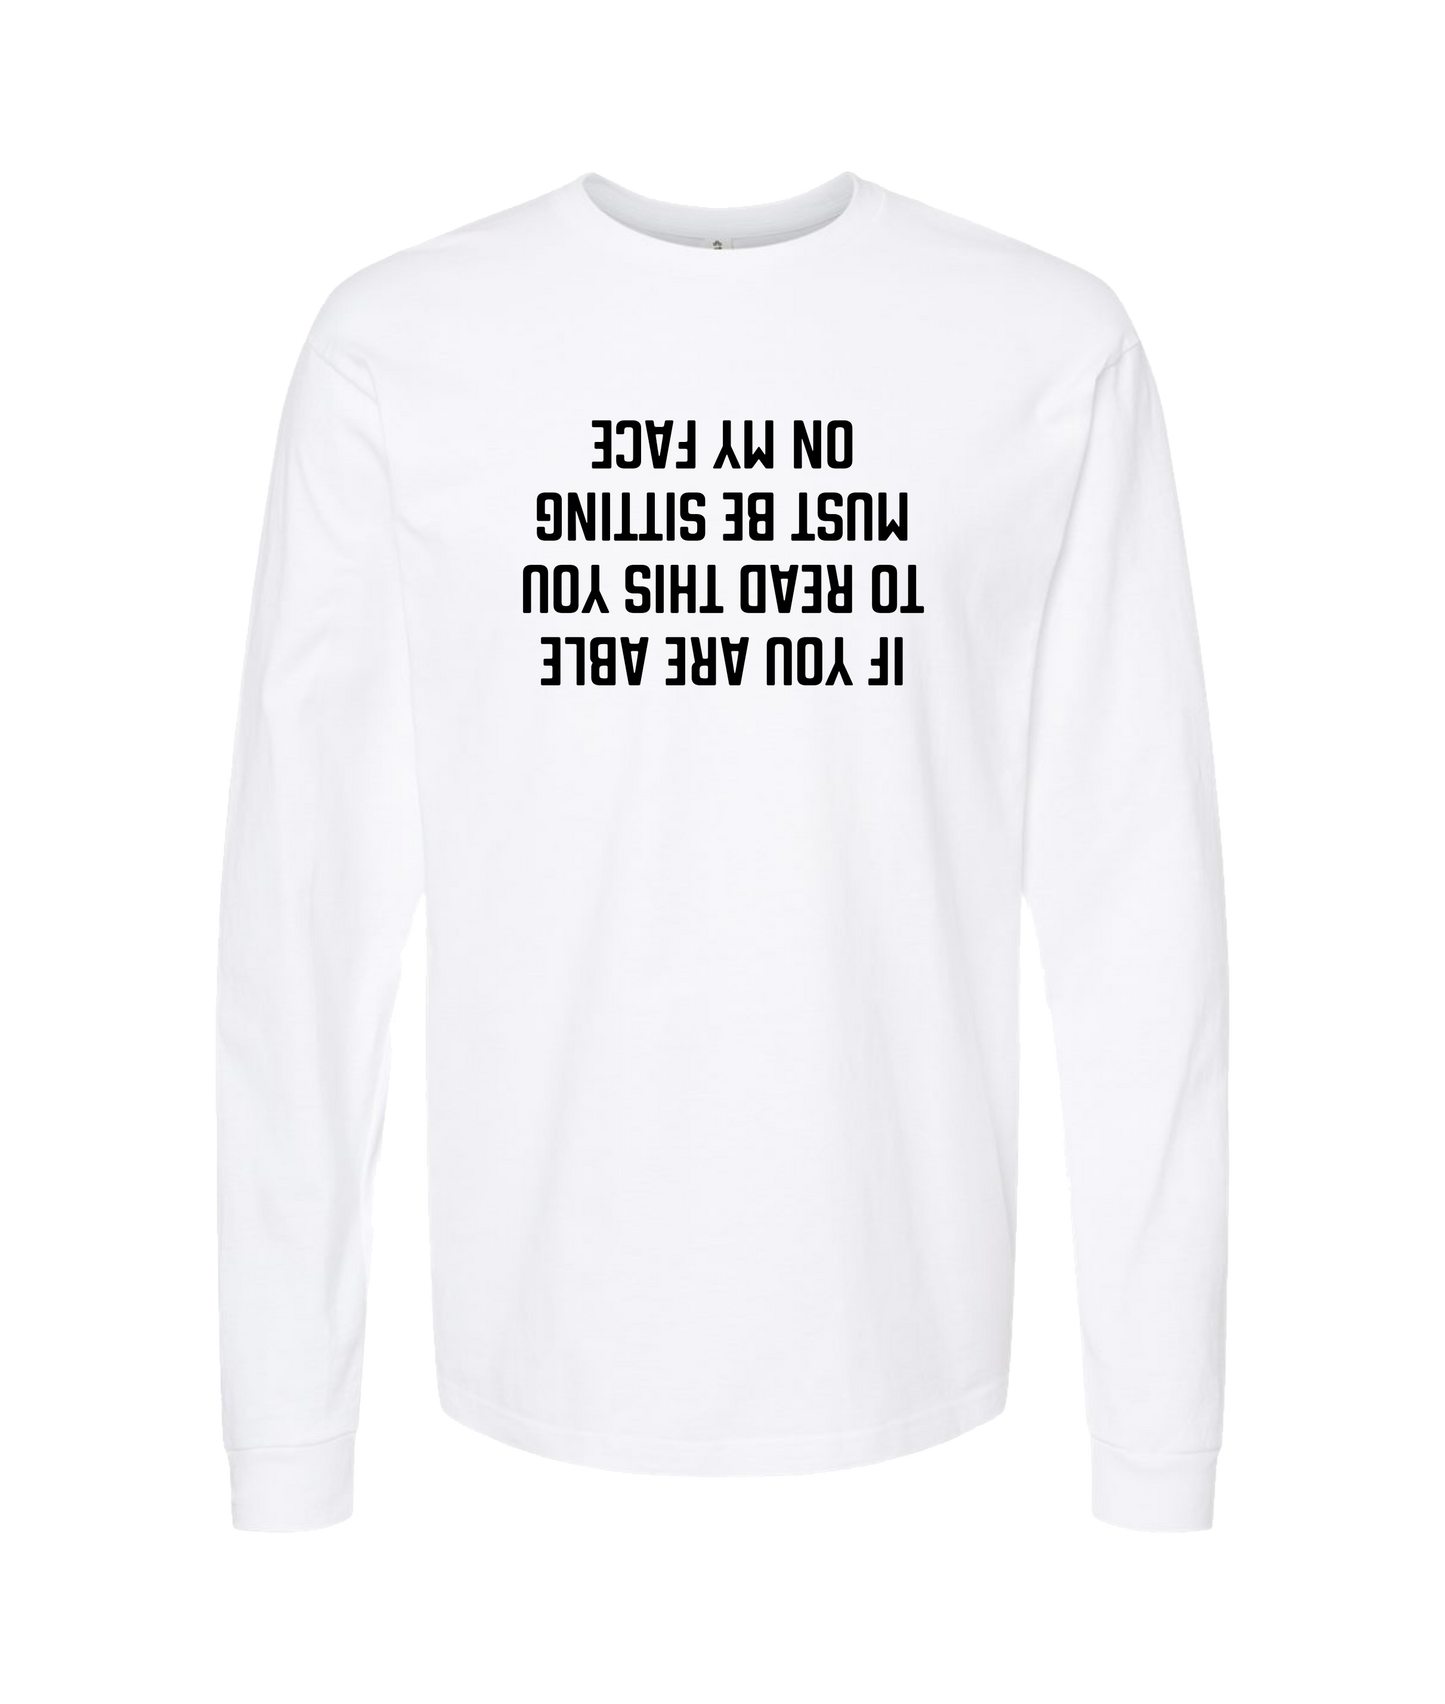 Purple Zebra - If You Are Able to Read This - White Long Sleeve T